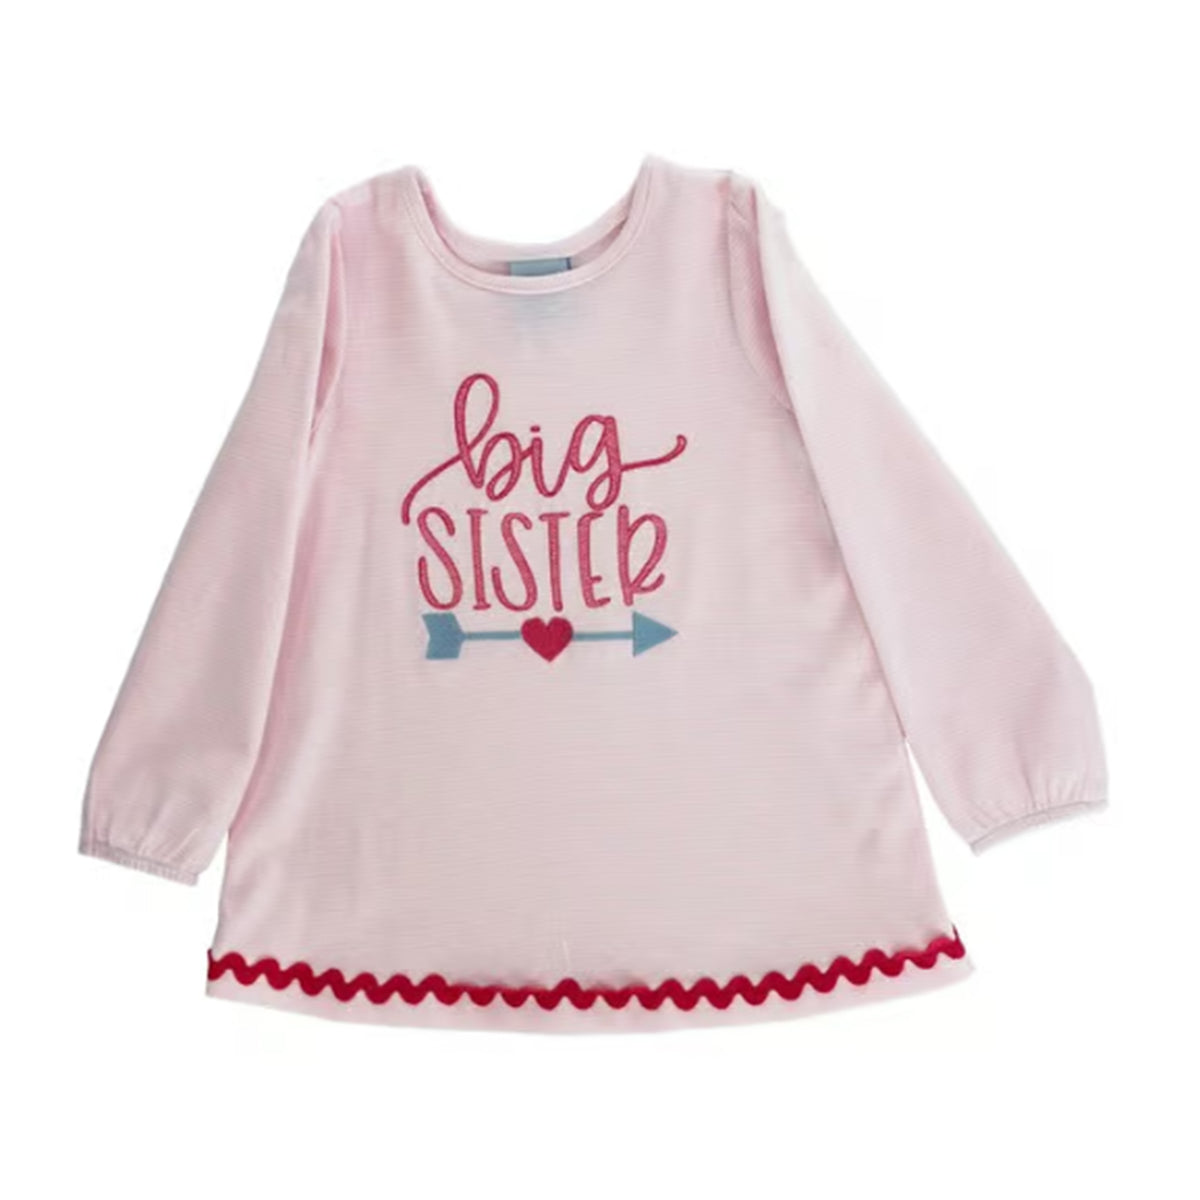 Little Girl's Big Sister Tunic Pink Striped Appliqued Top Bailey Boys